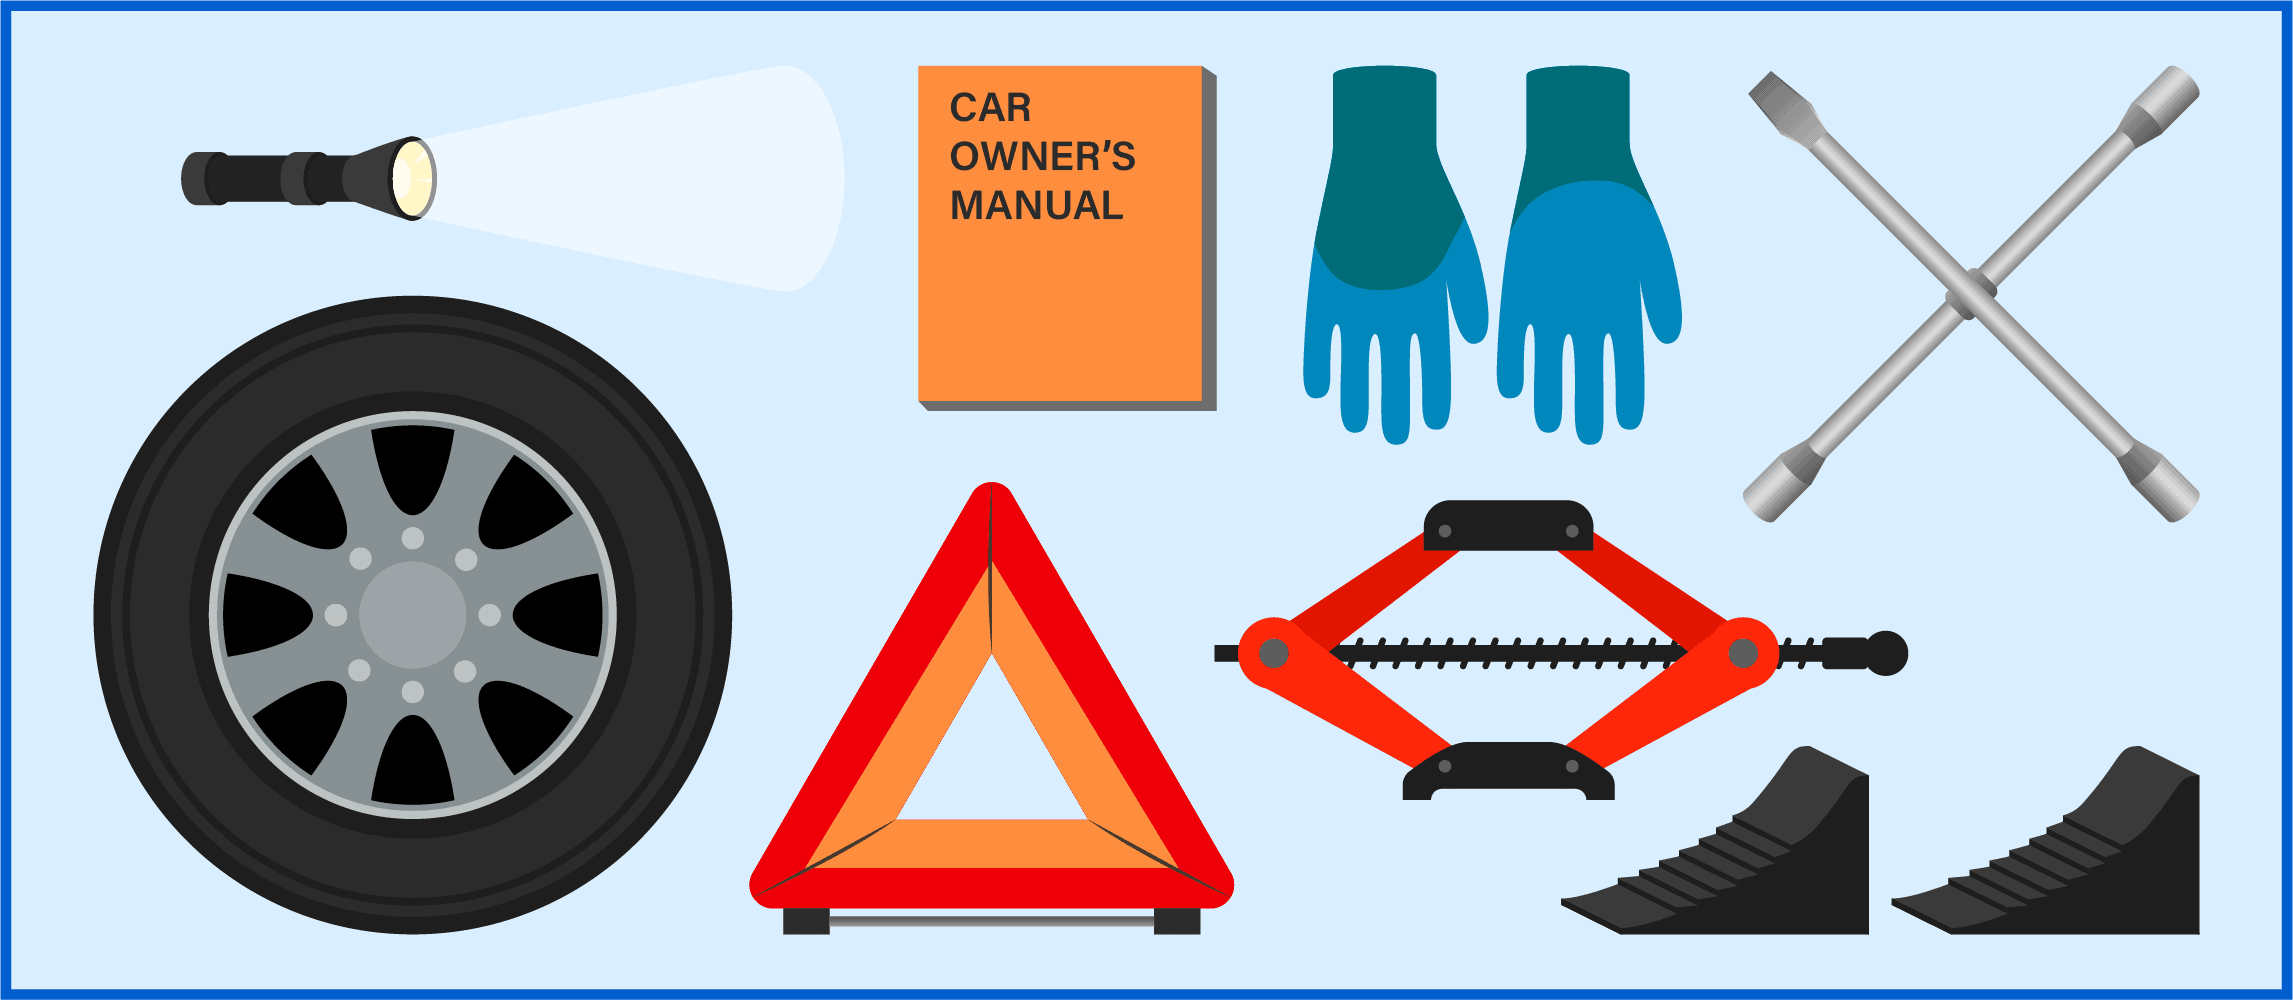 How To Change A Tire On A Car